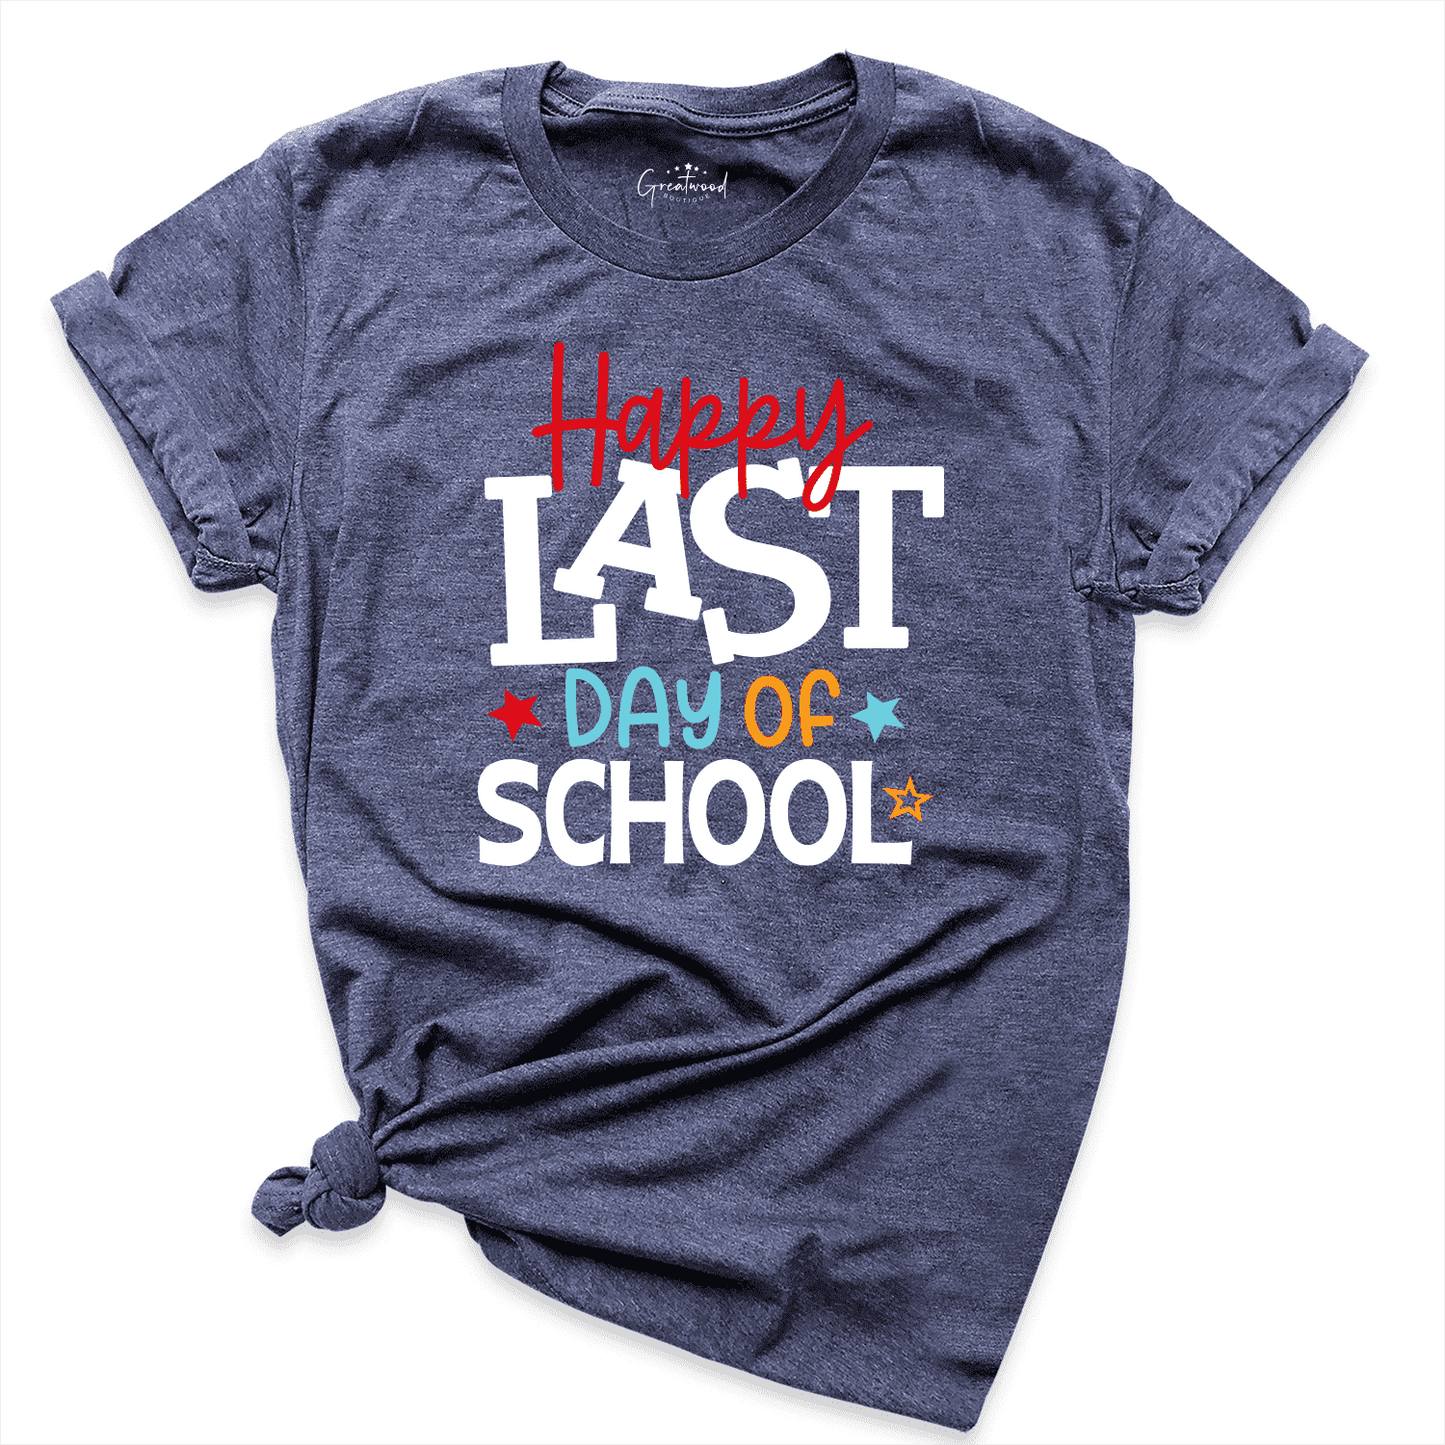 Last Day of School Shirt Navy - Greatwood Boutique